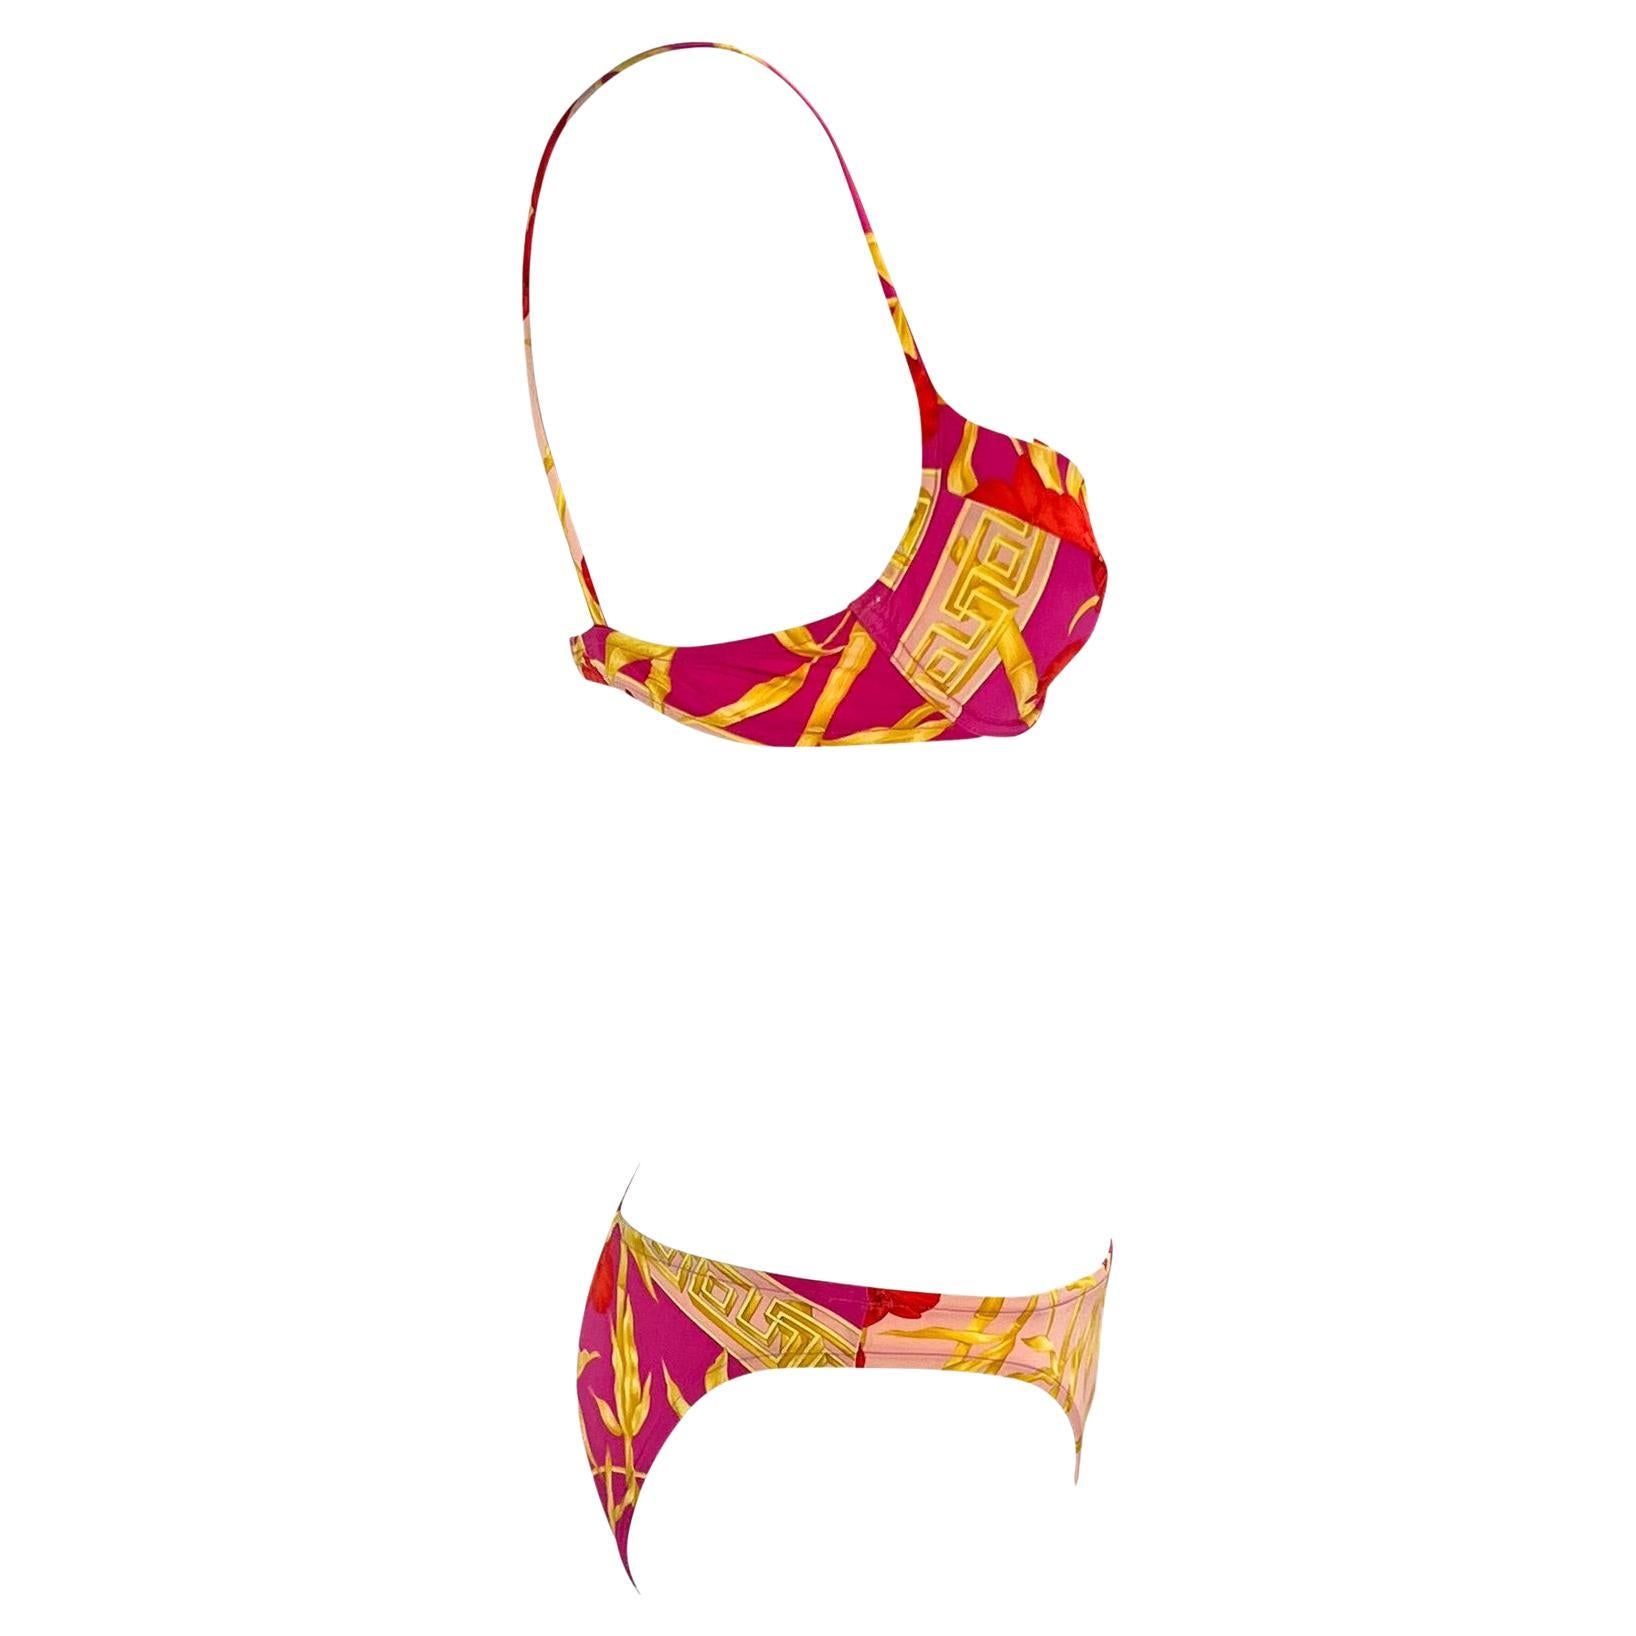 S/S 2000 Gianni Versace by Donatella Pink Medusa Orchid Bikini Swimsuit Set In Good Condition For Sale In West Hollywood, CA